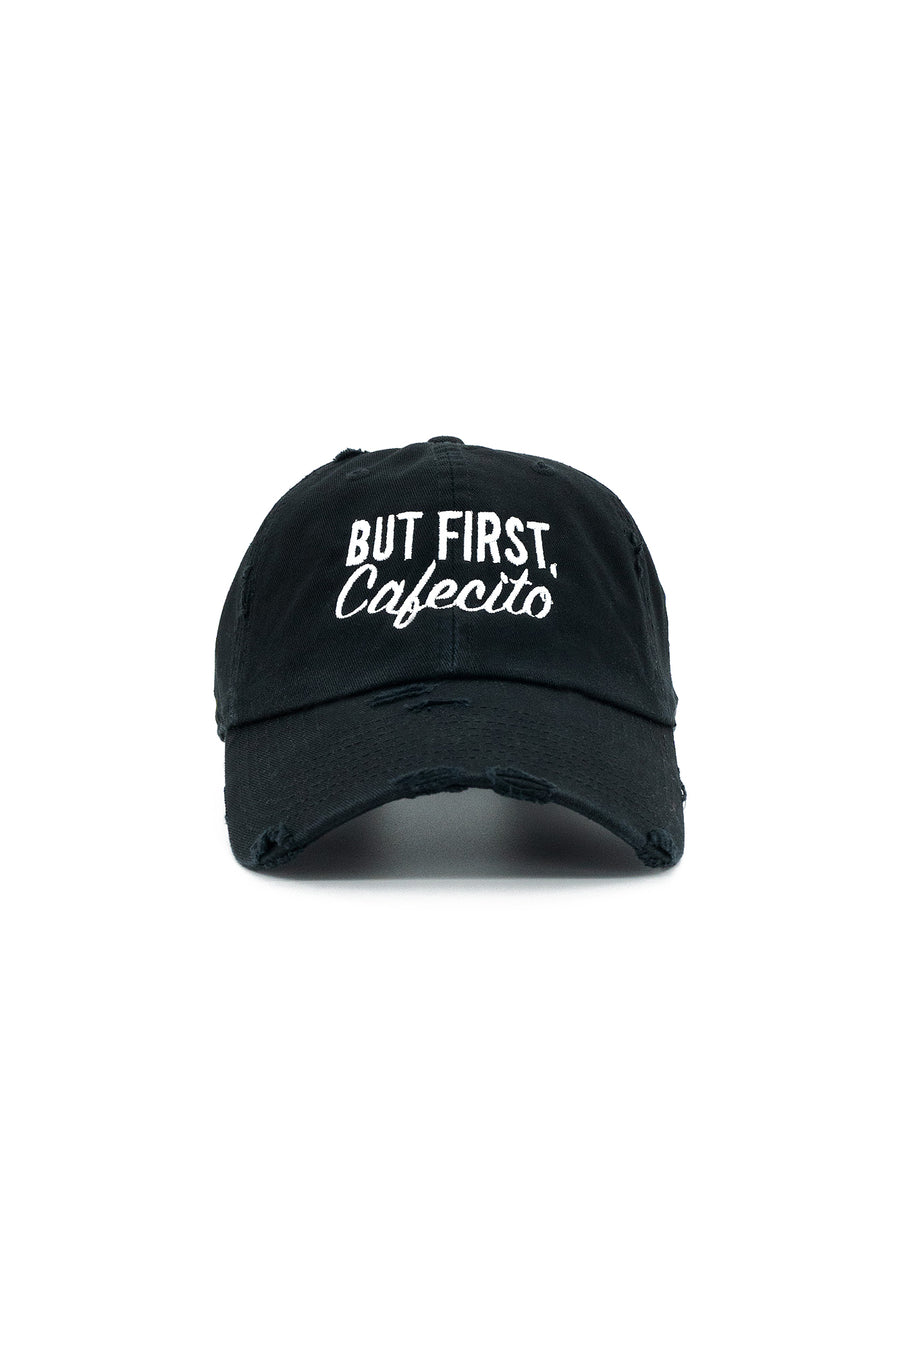 But First, Cafecito Distressed Hat